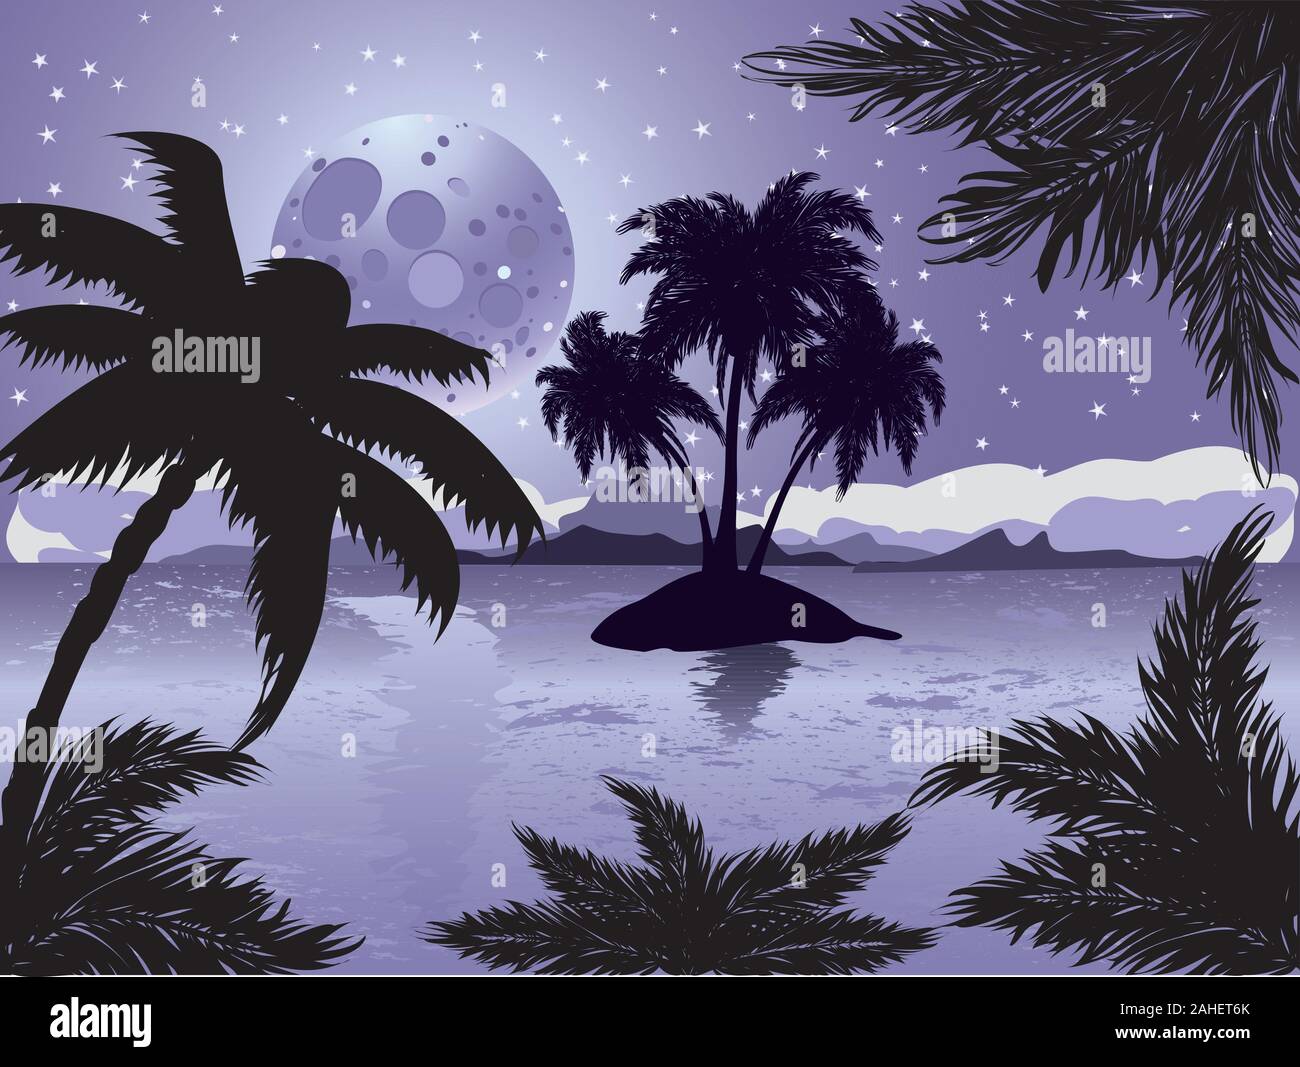 Palm trees silhouette on night tropic beach background with abstract moon. Stock Vector